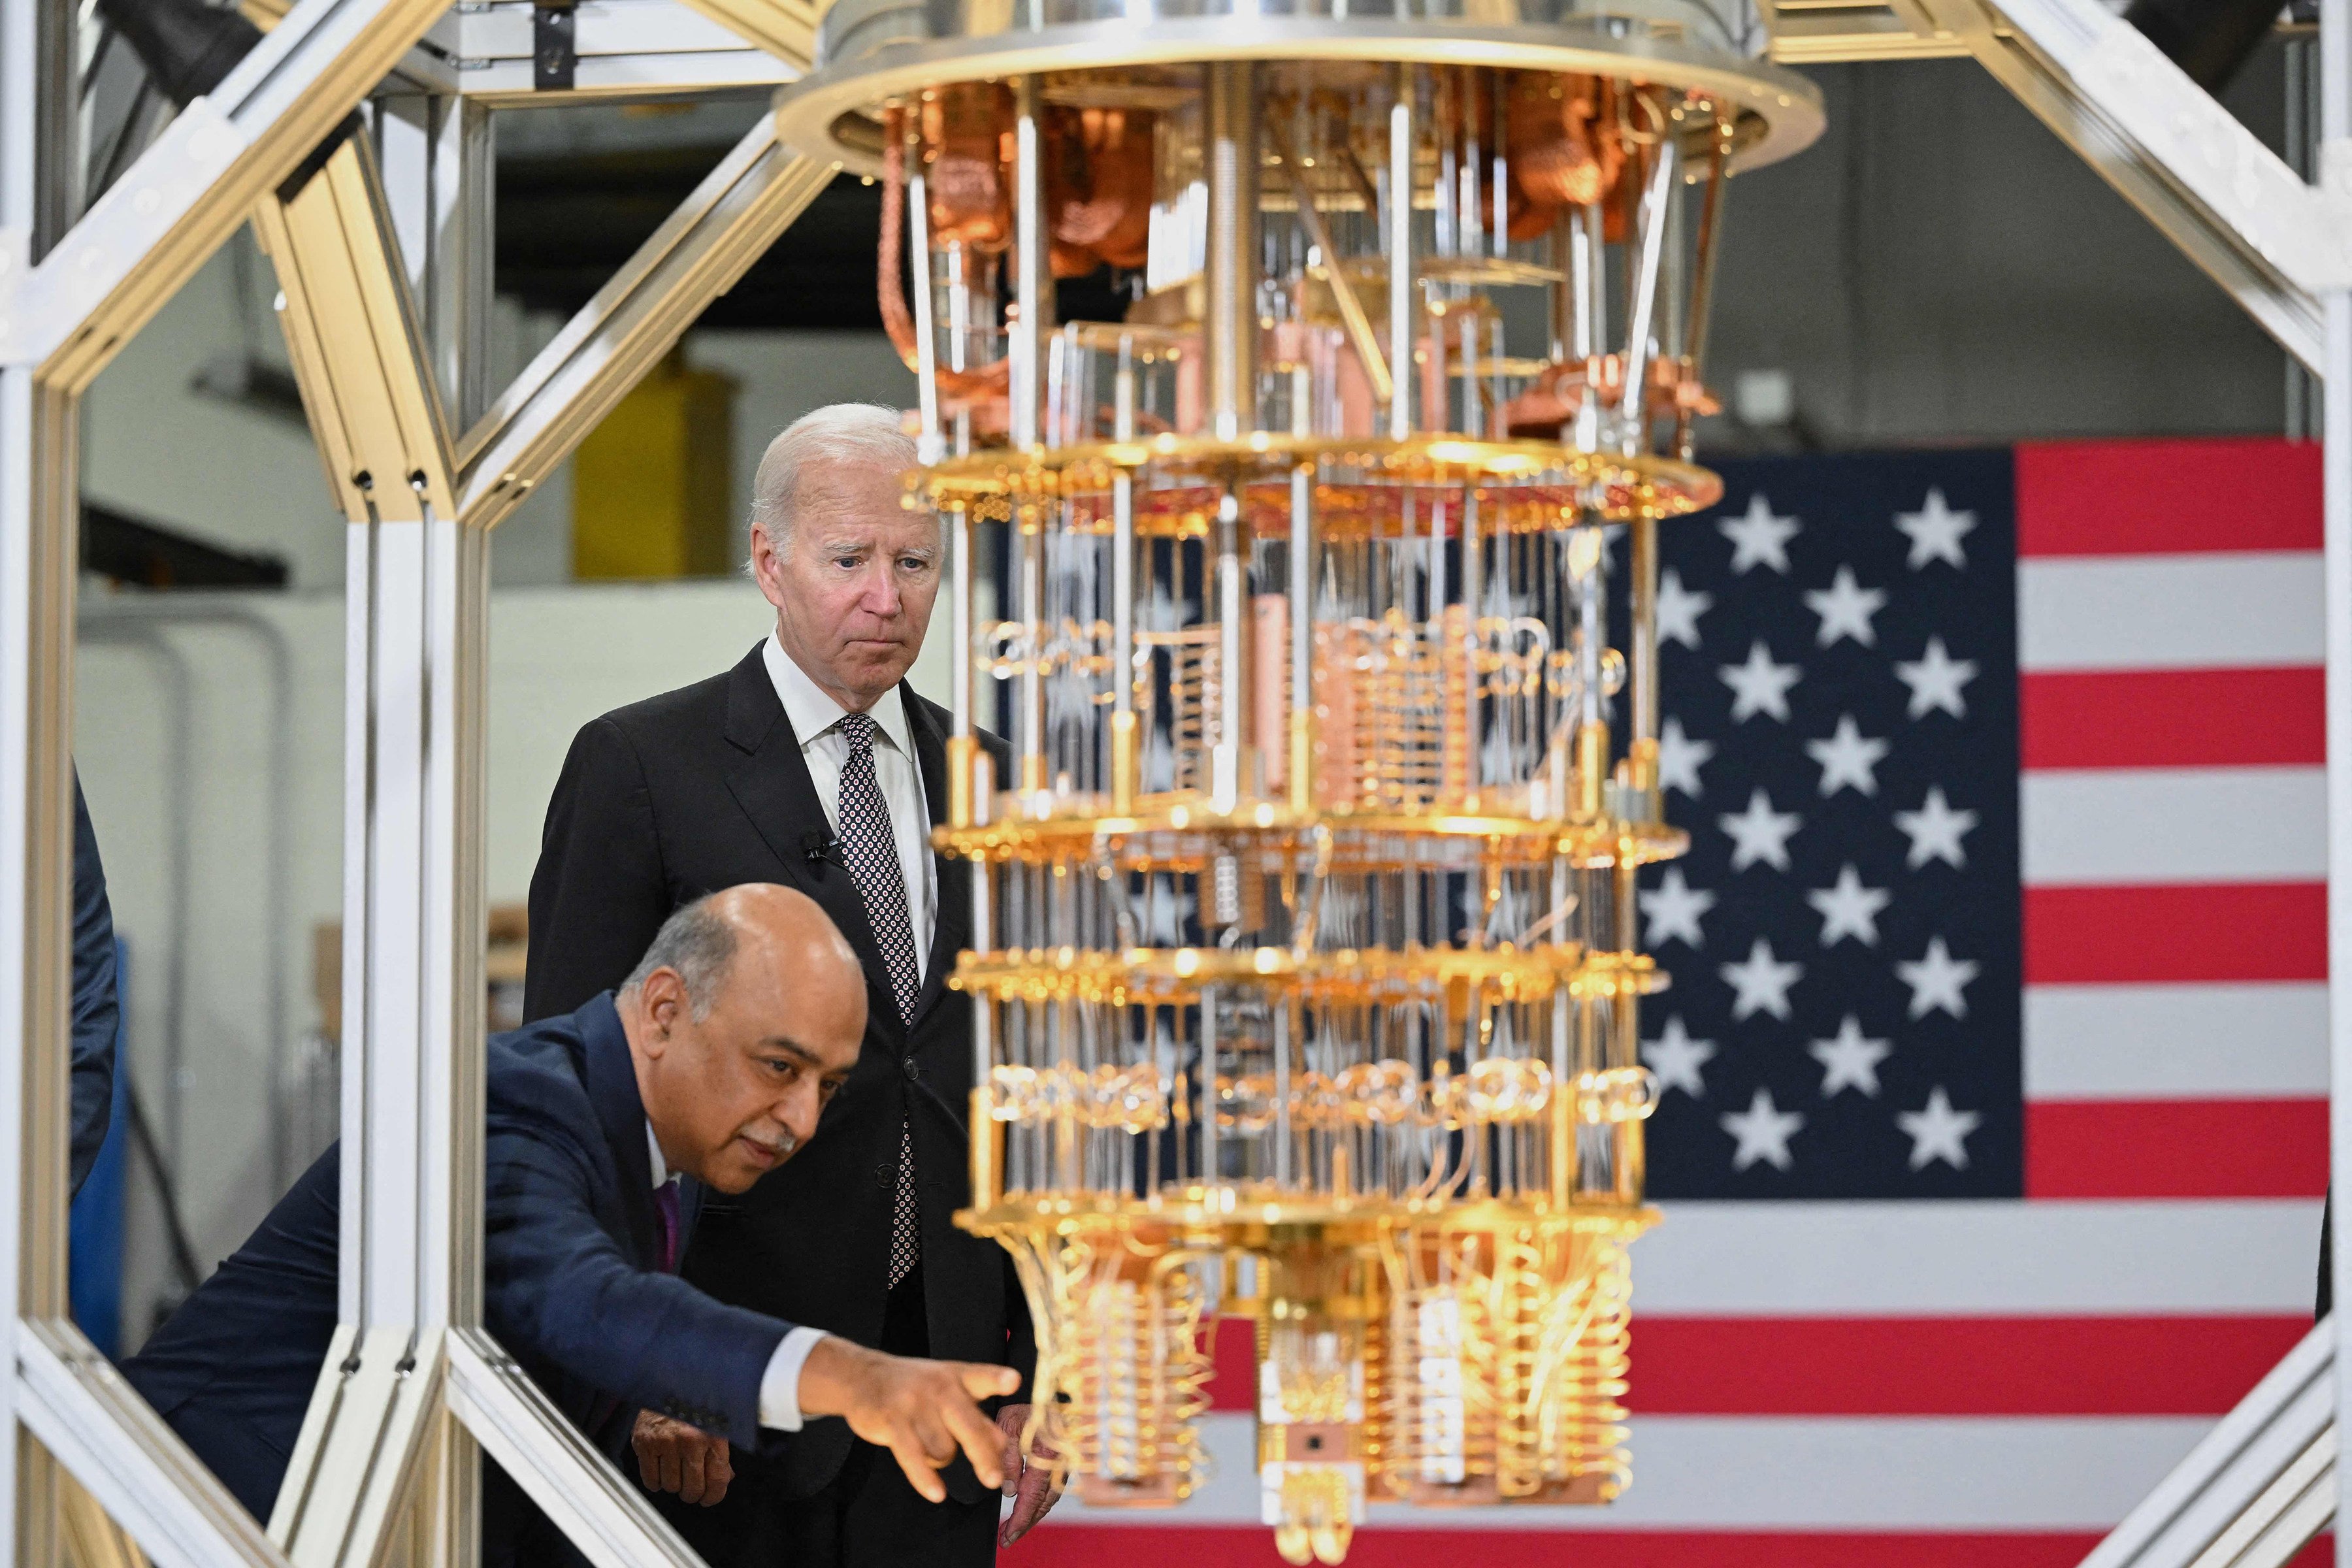 US President Joe Biden listens to IBM CEO Arvind Krishna during a tour of the IBM facility in Poughkeepsie, New York, on October 6. Krishna announced a US$20 billion investment in quantum computing, semiconductor manufacturing and other hi-tech areas in its New York state facilities. Photo: AFP